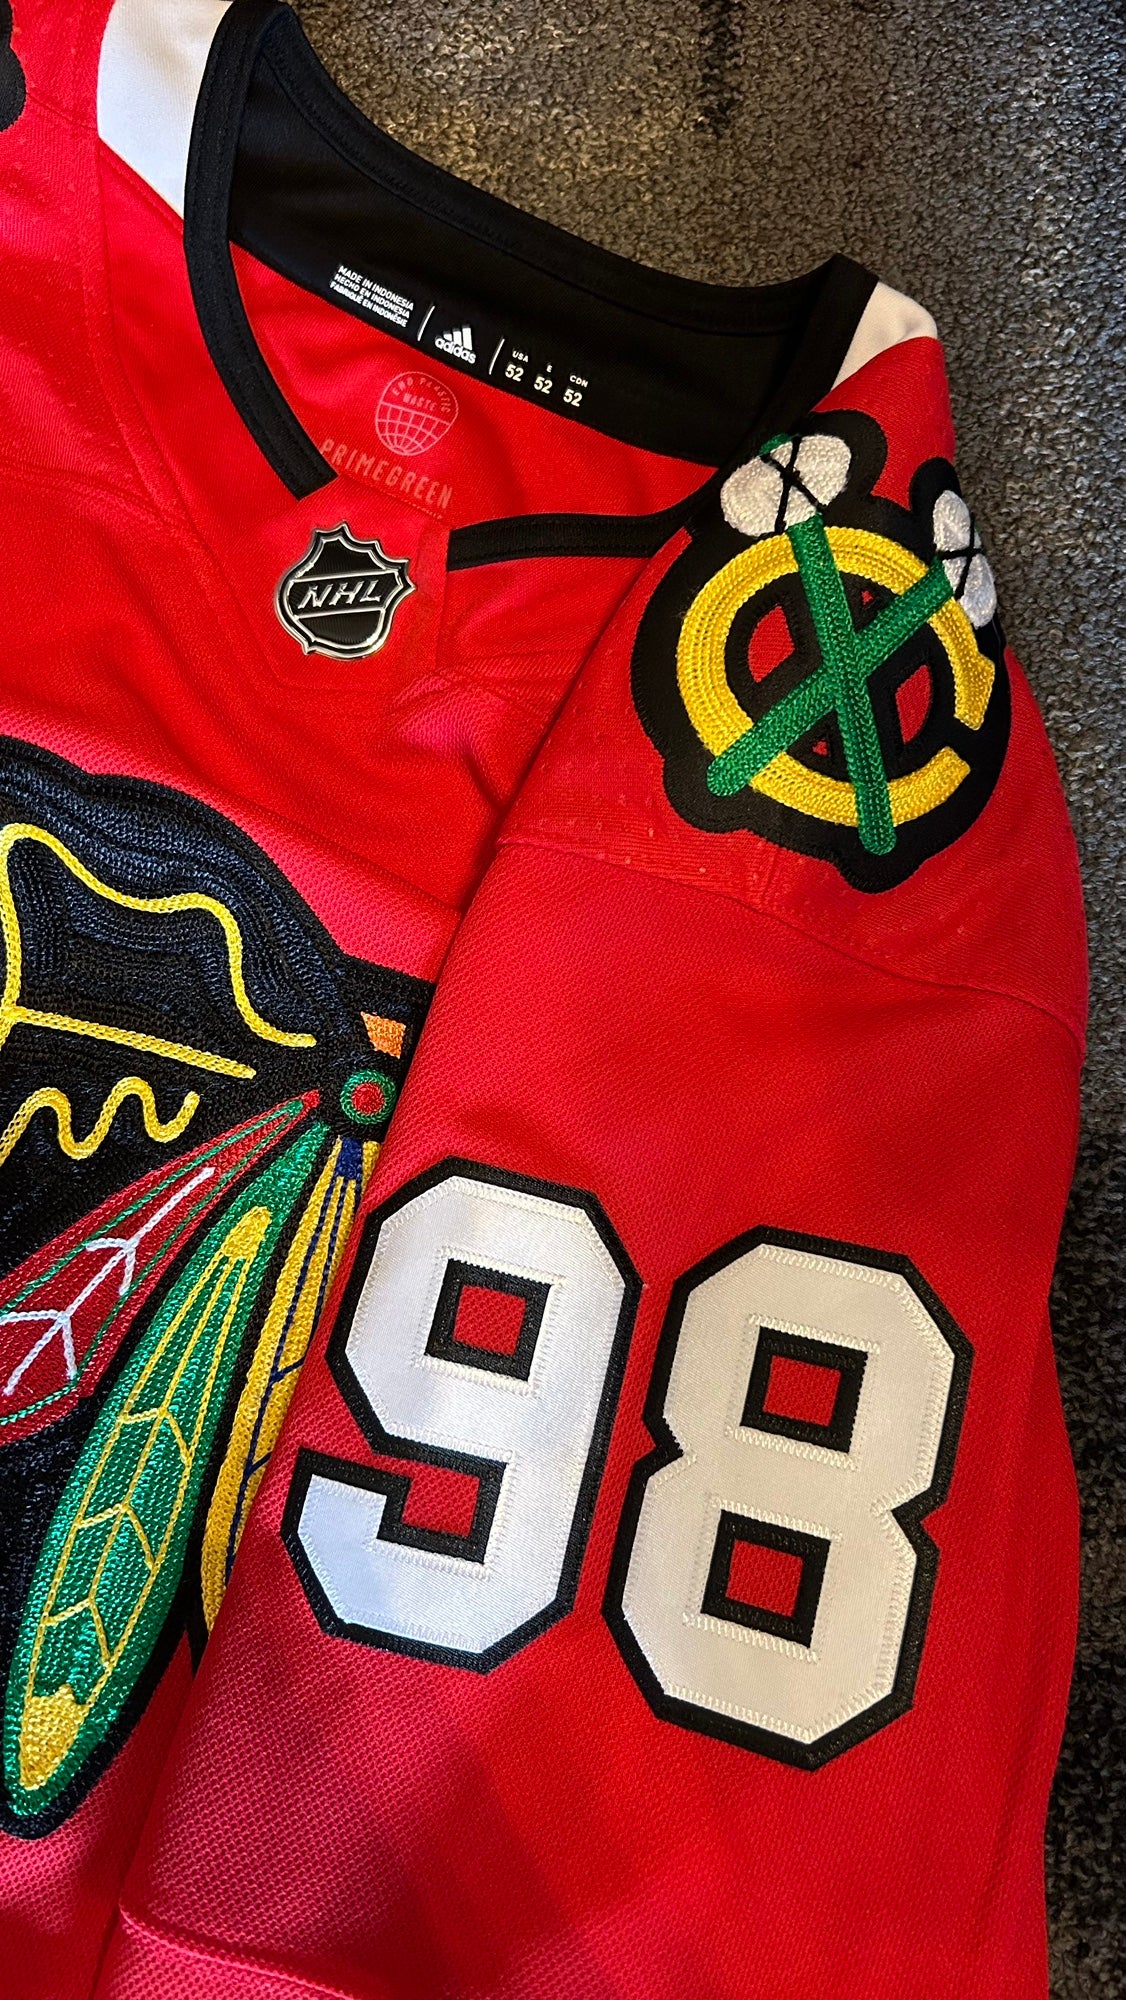 ⚾️ X 🏒 This Southside hockey jersey would probably look good on Connor  Bedard. 👀 What do you think, @nhlblackhawks?